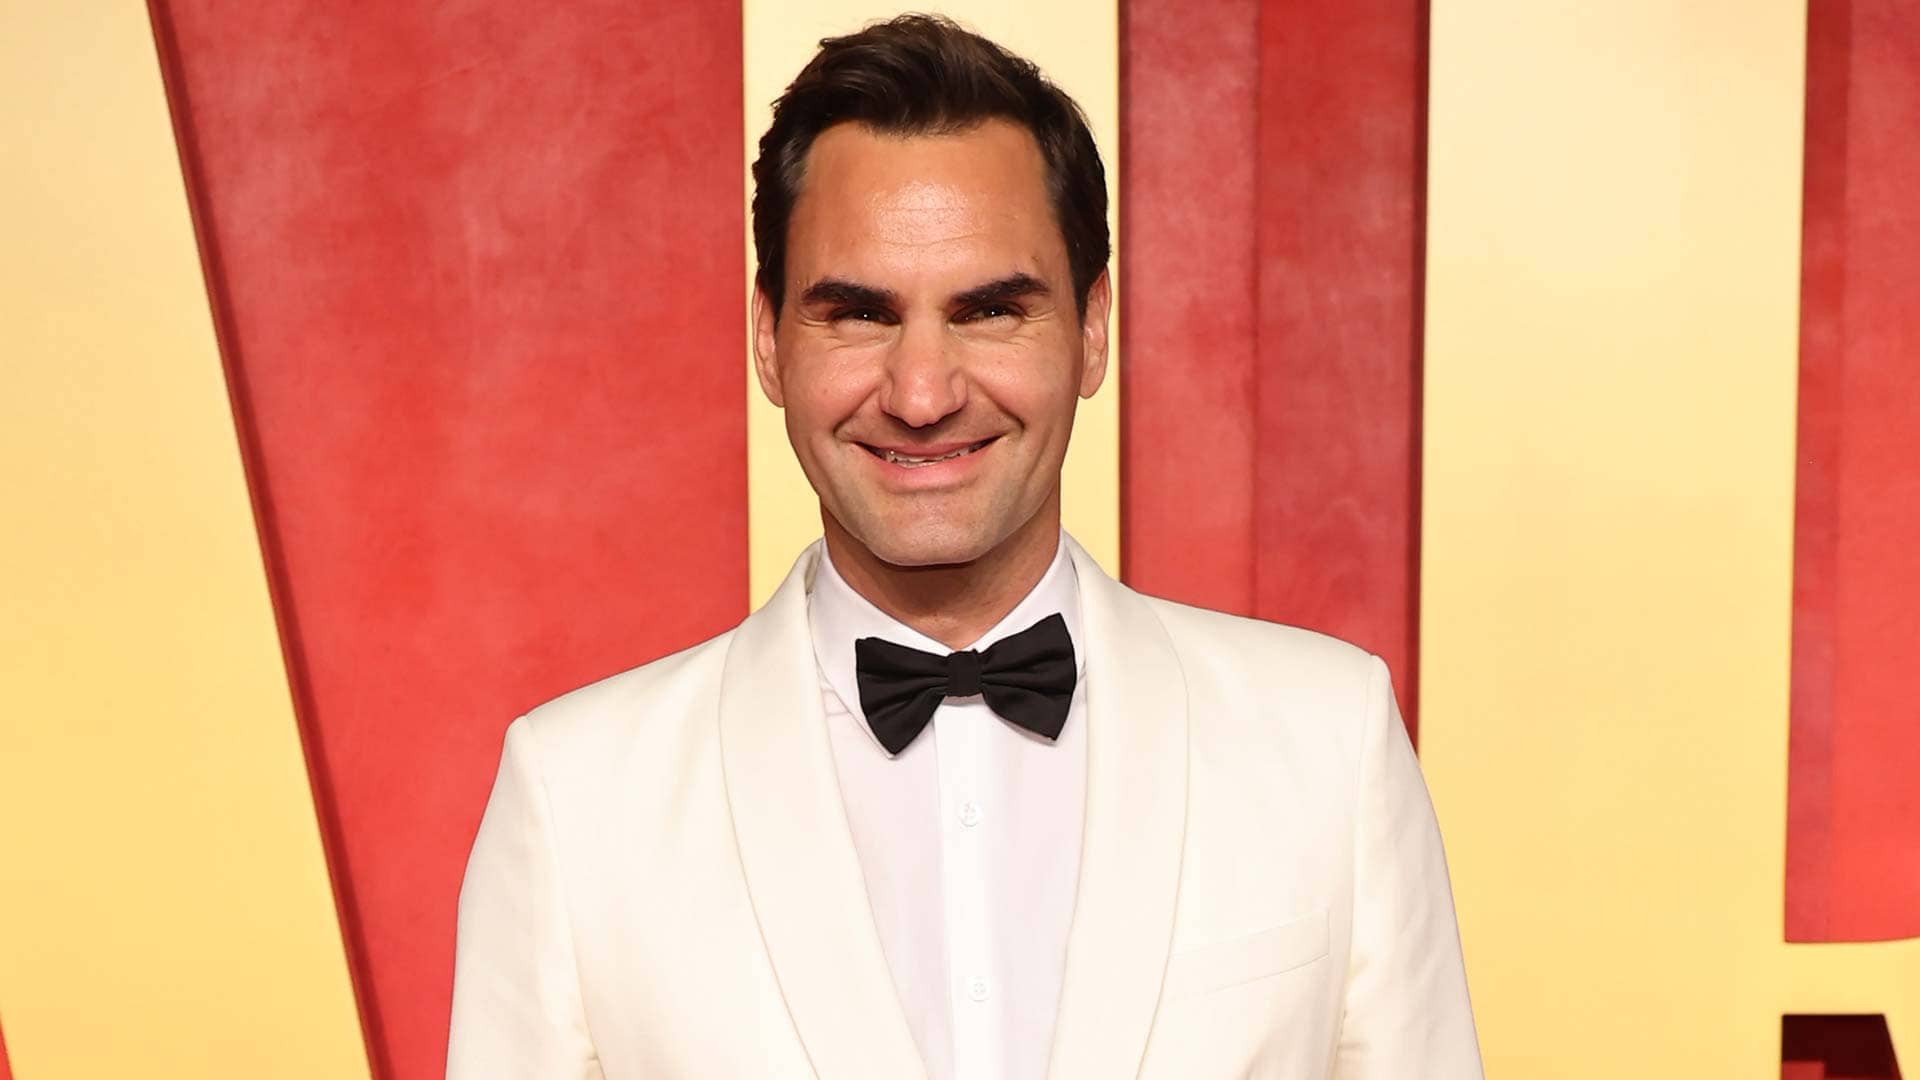 Federer 'excited and honoured' to speak at Dartmouth College commencement